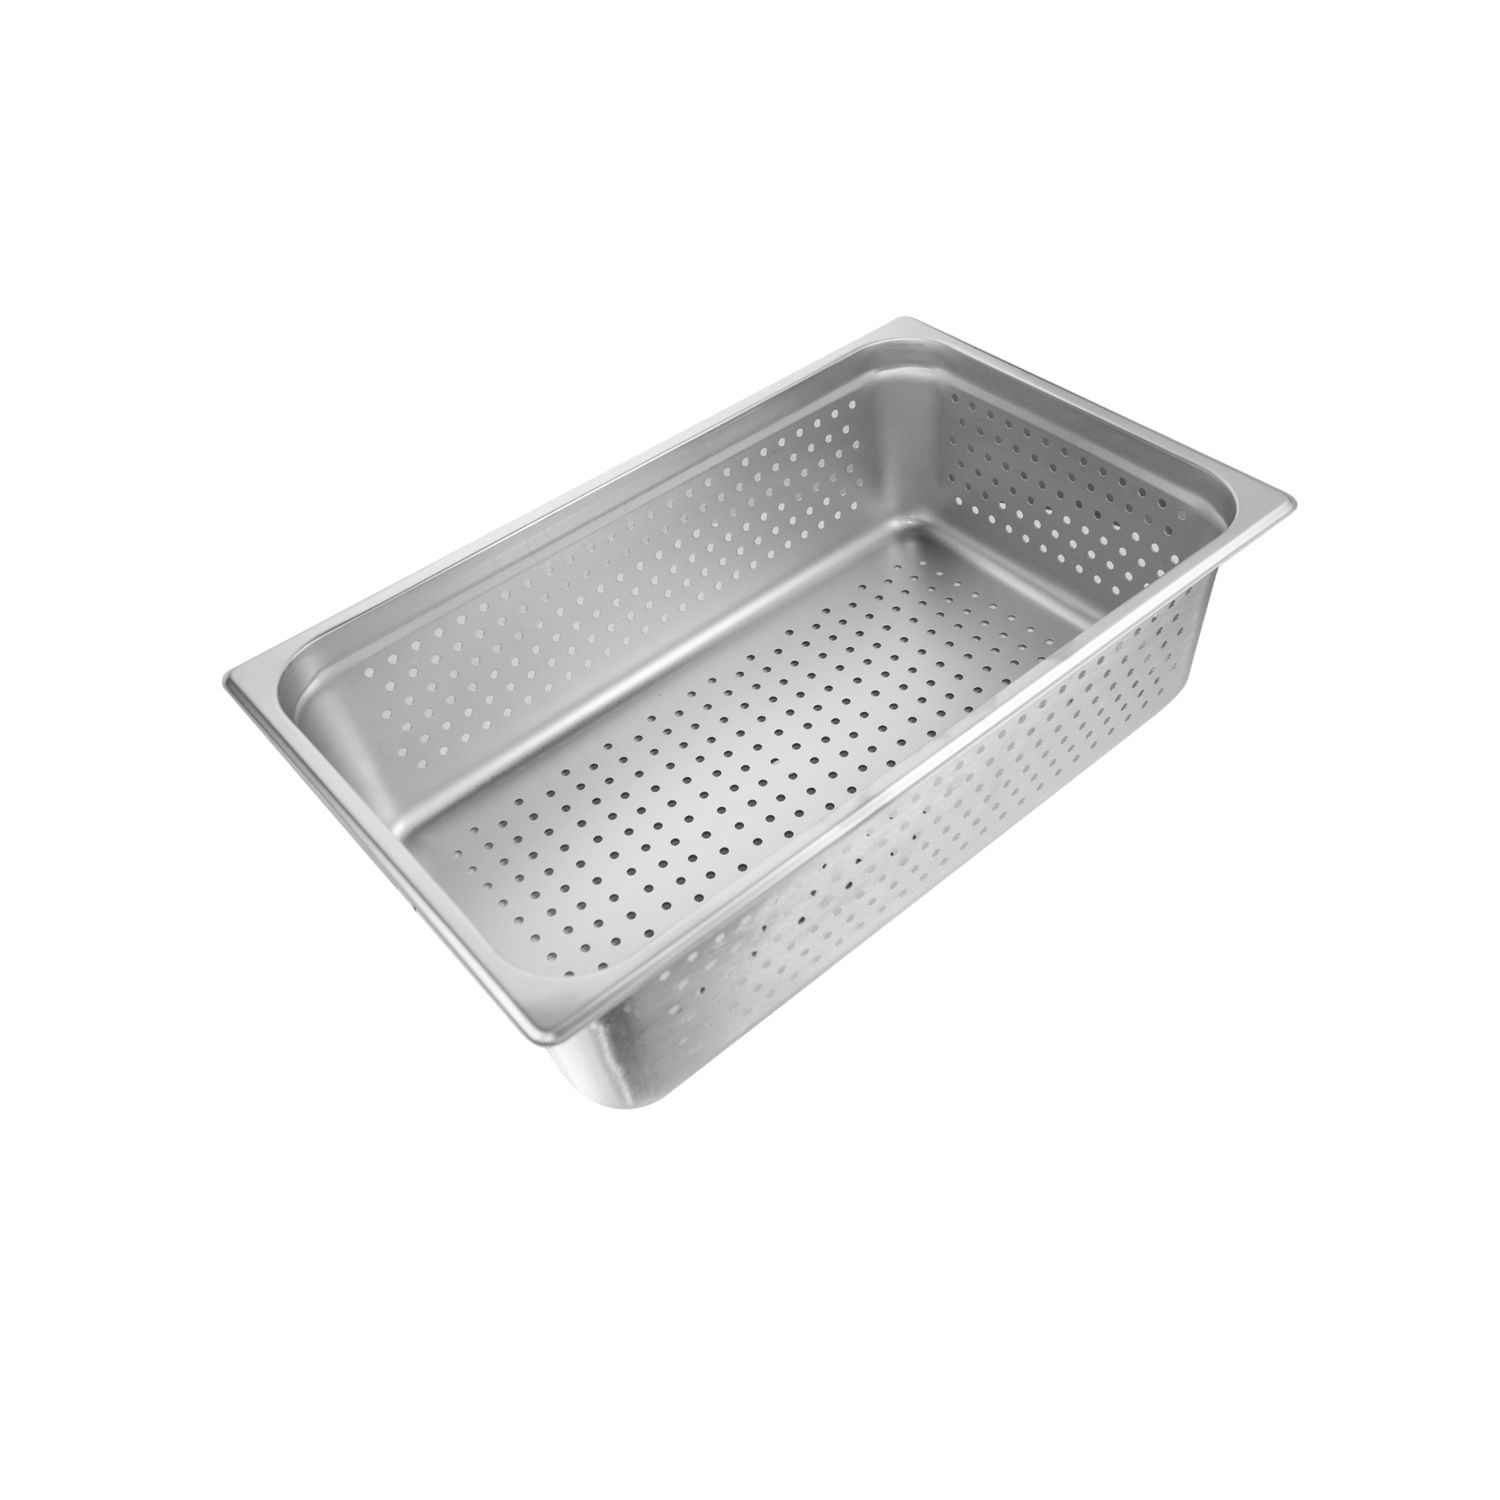 Excellante Full Size 2-Inch Deep Perforated 24 Gauge Steam Pans 